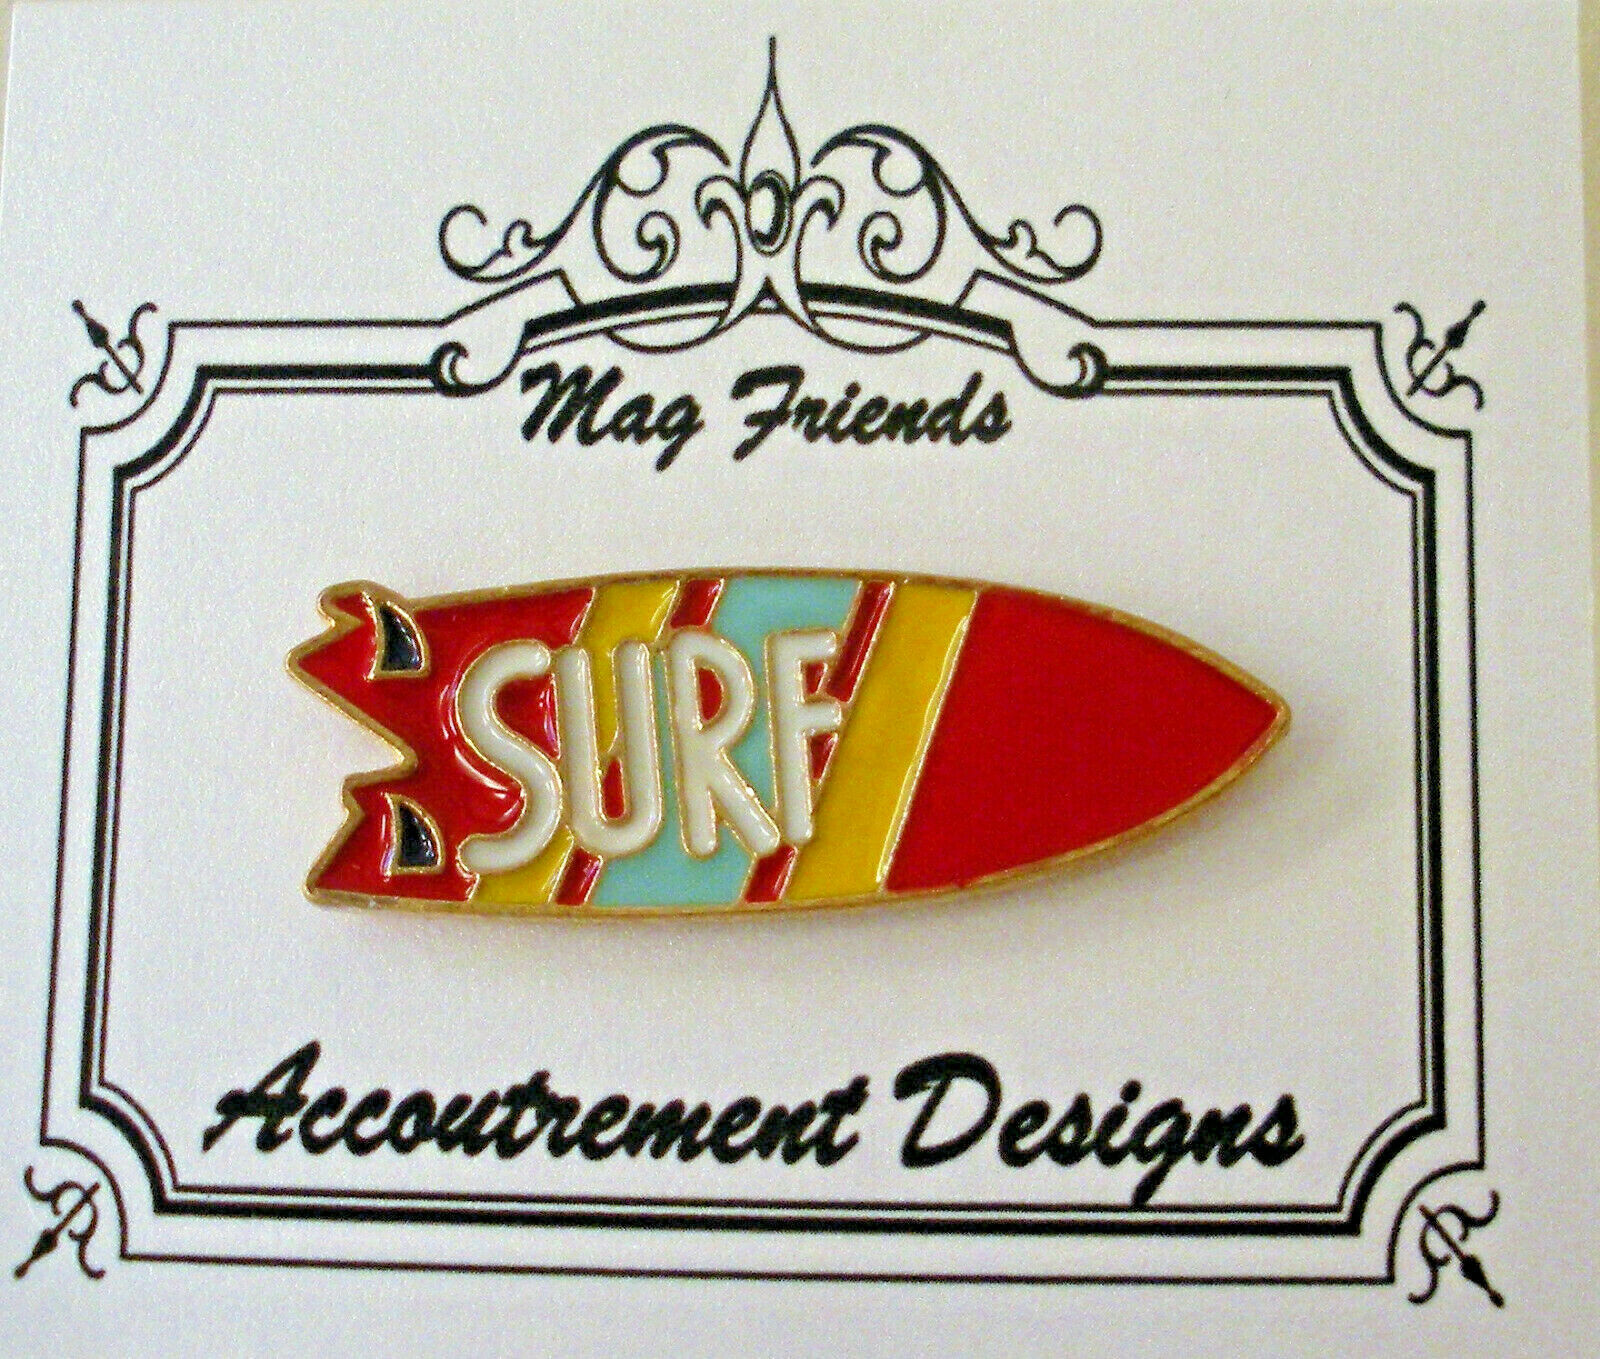 Needle Minder Magnet Surfboard Accoutrement Designs Needlepoint Mag Friends